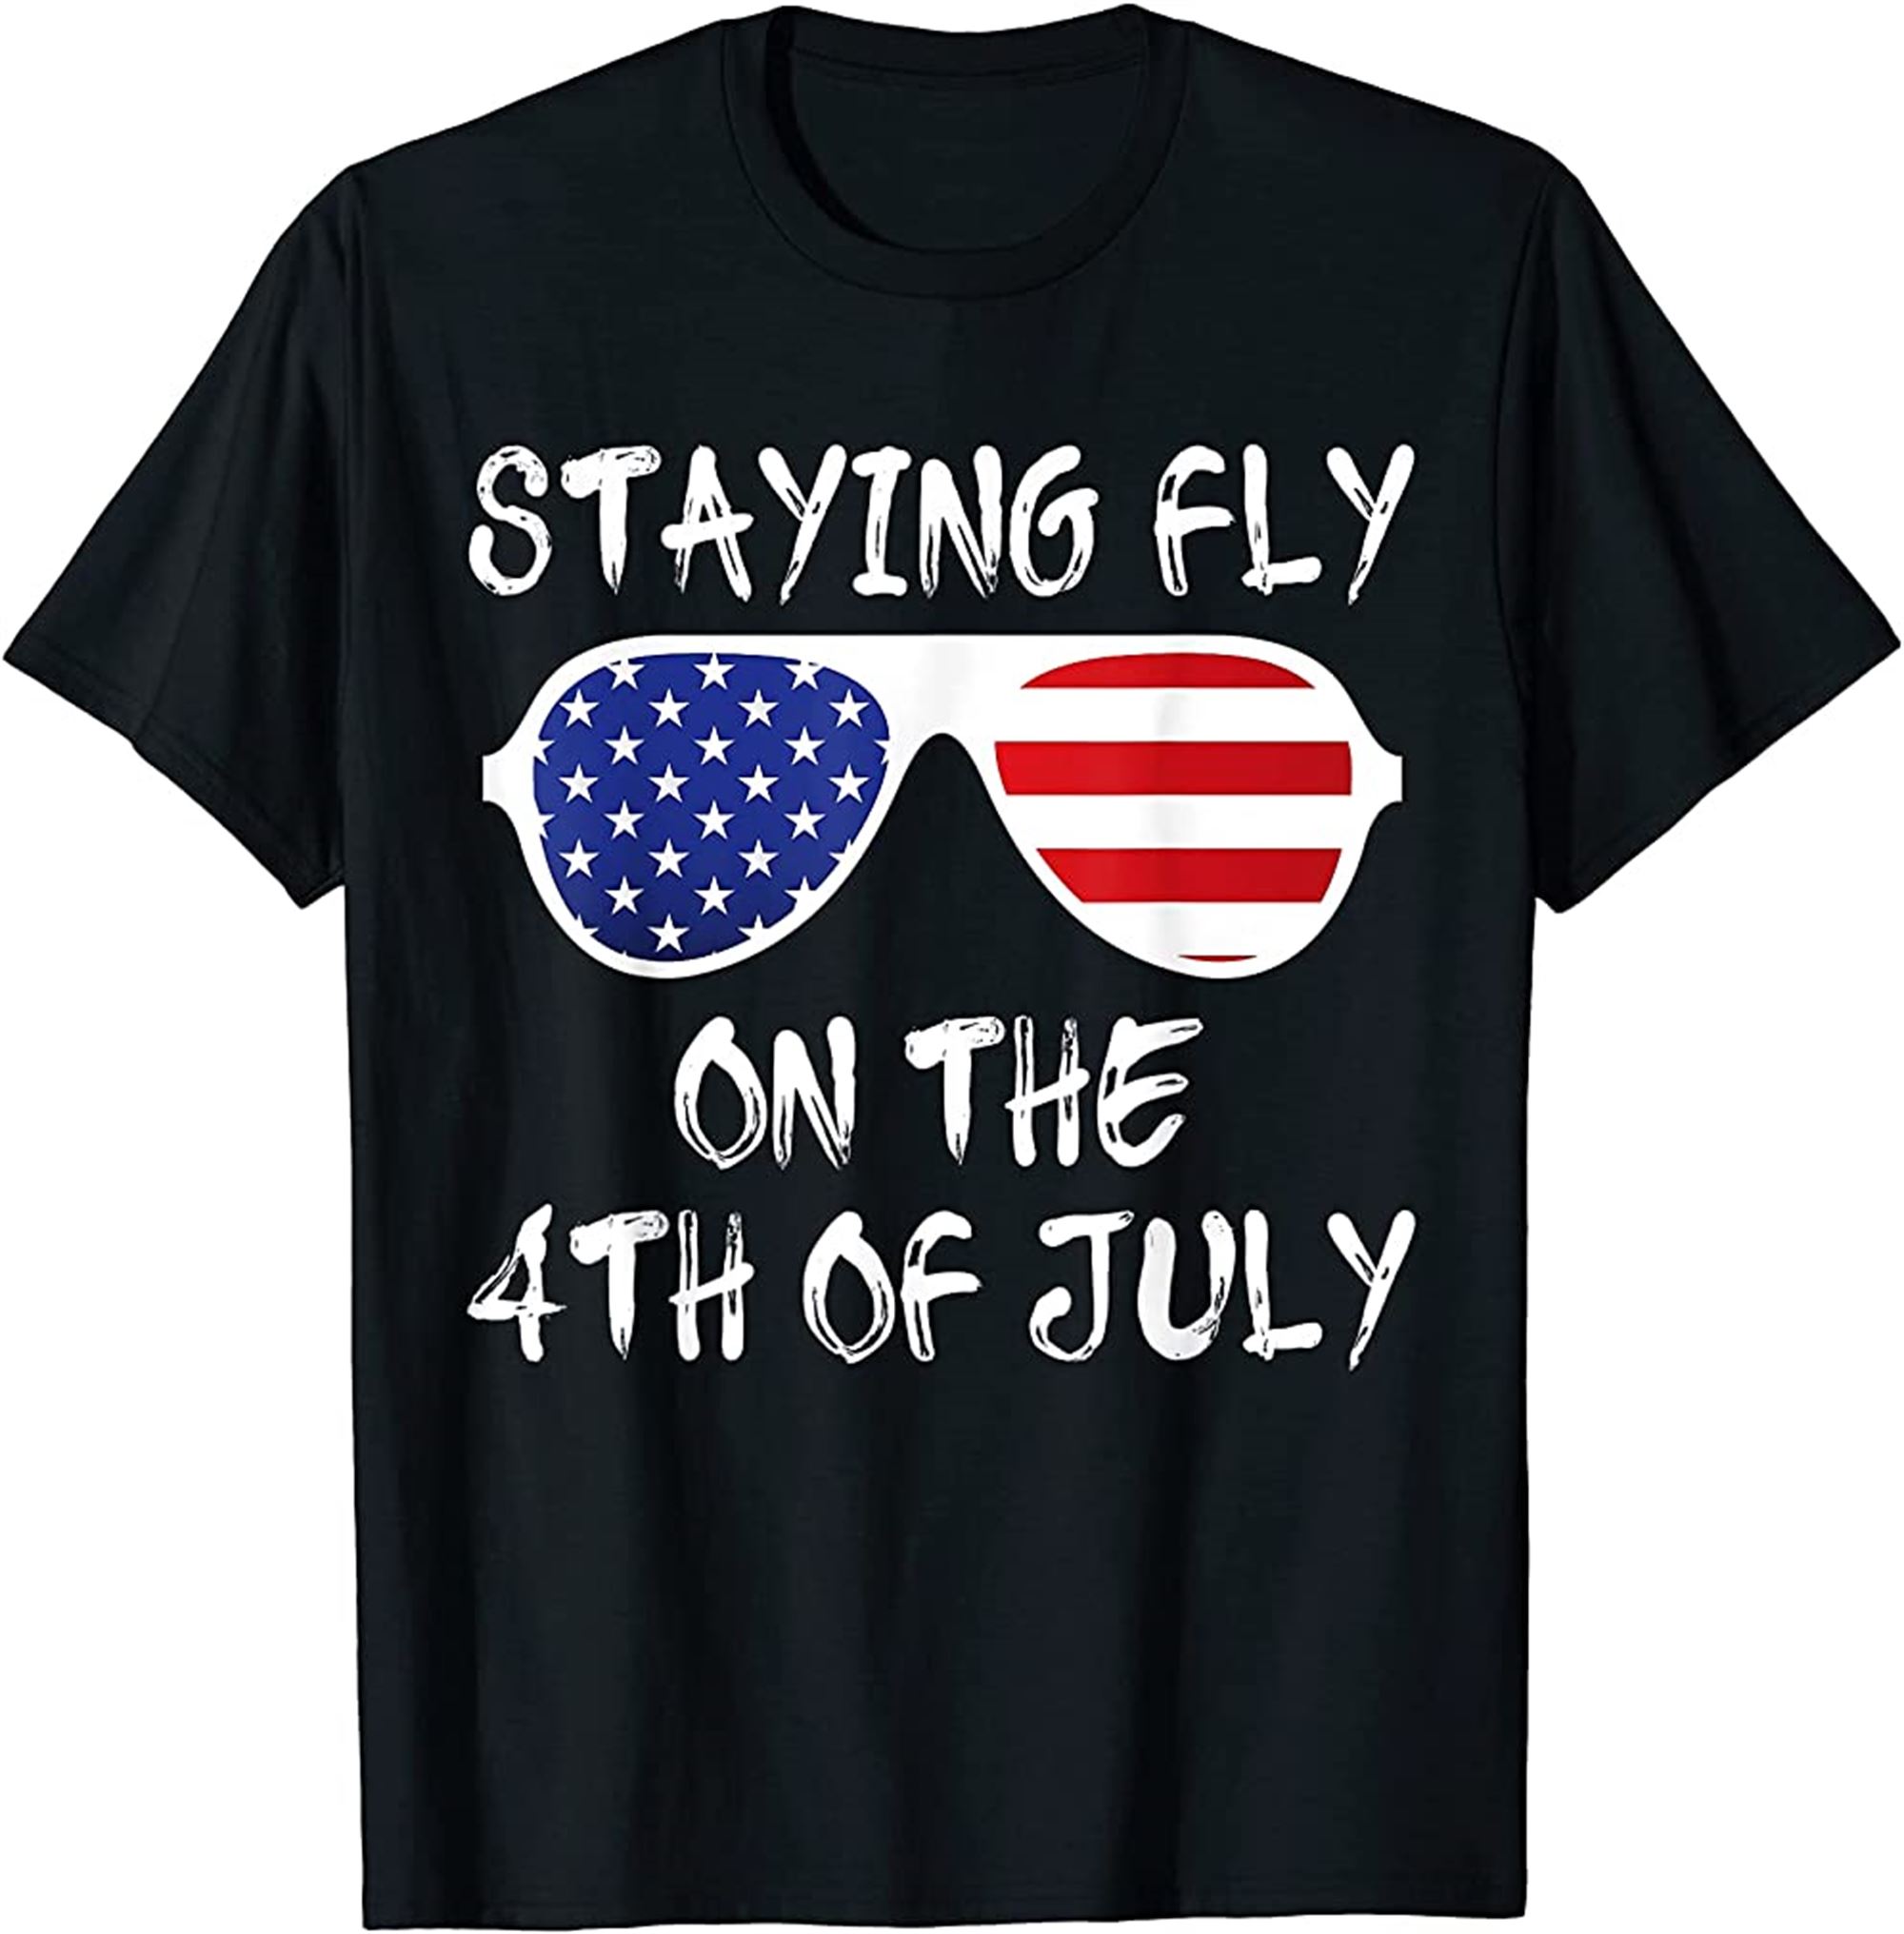 Staying Fly On The Fourth Of July Tshirt Merica Sunglasses Tshirt Full Size Up To 5xl